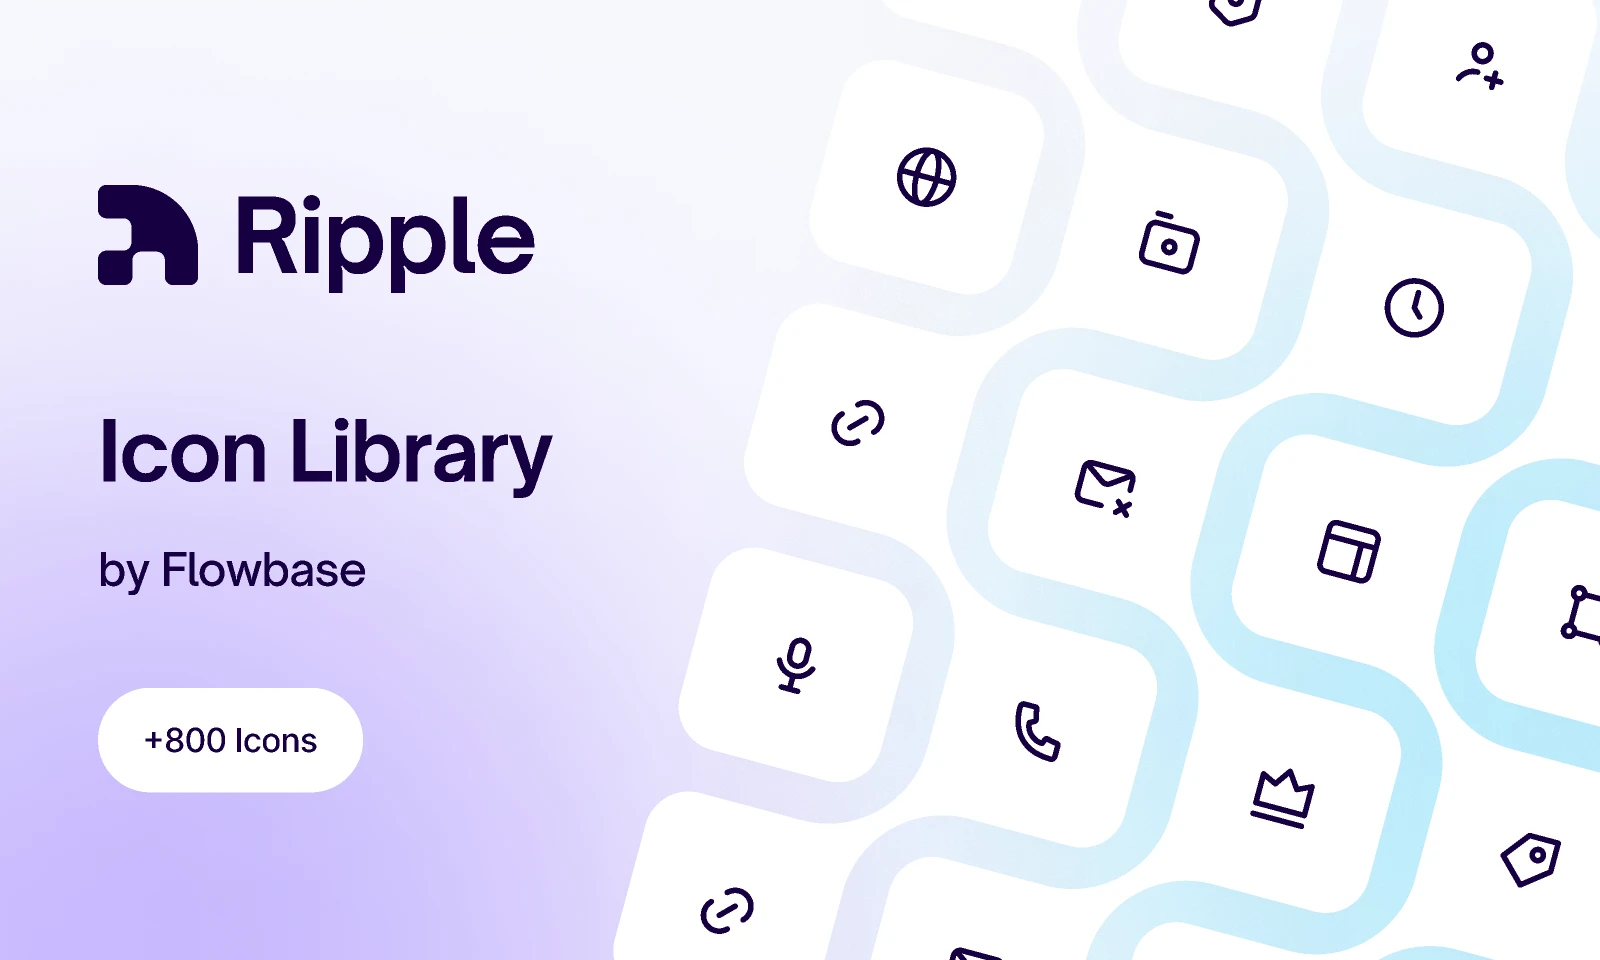   Ripple Icon Library / By Flowbase.co for Figma and Adobe XD